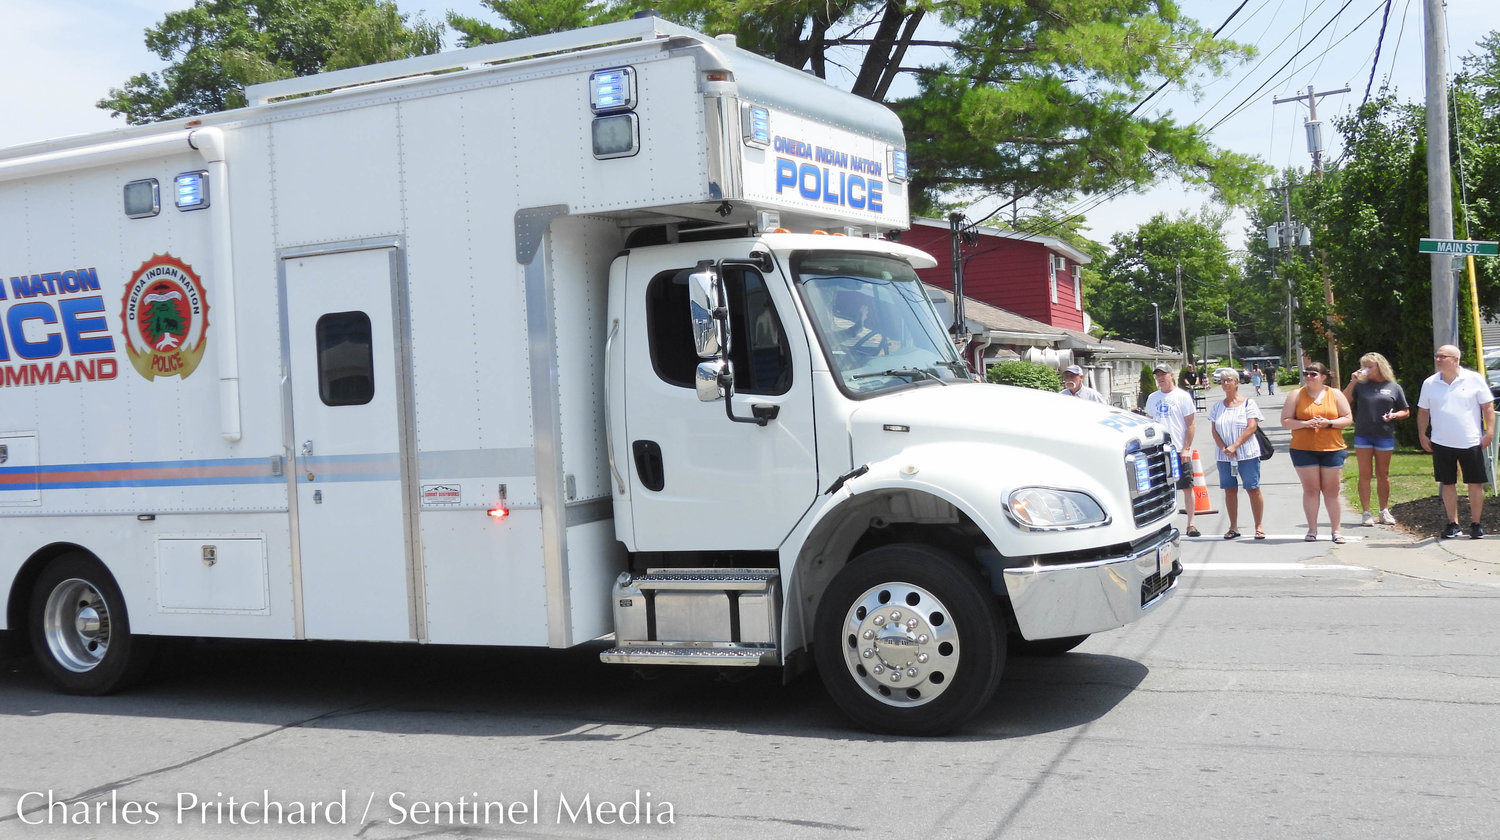 The Sylvan Beach Pirate's Parade makes its way down Main Street. Pictured is the Oneida Indian Nation Police Department's mobile command, with drivers waving to parade attendees.